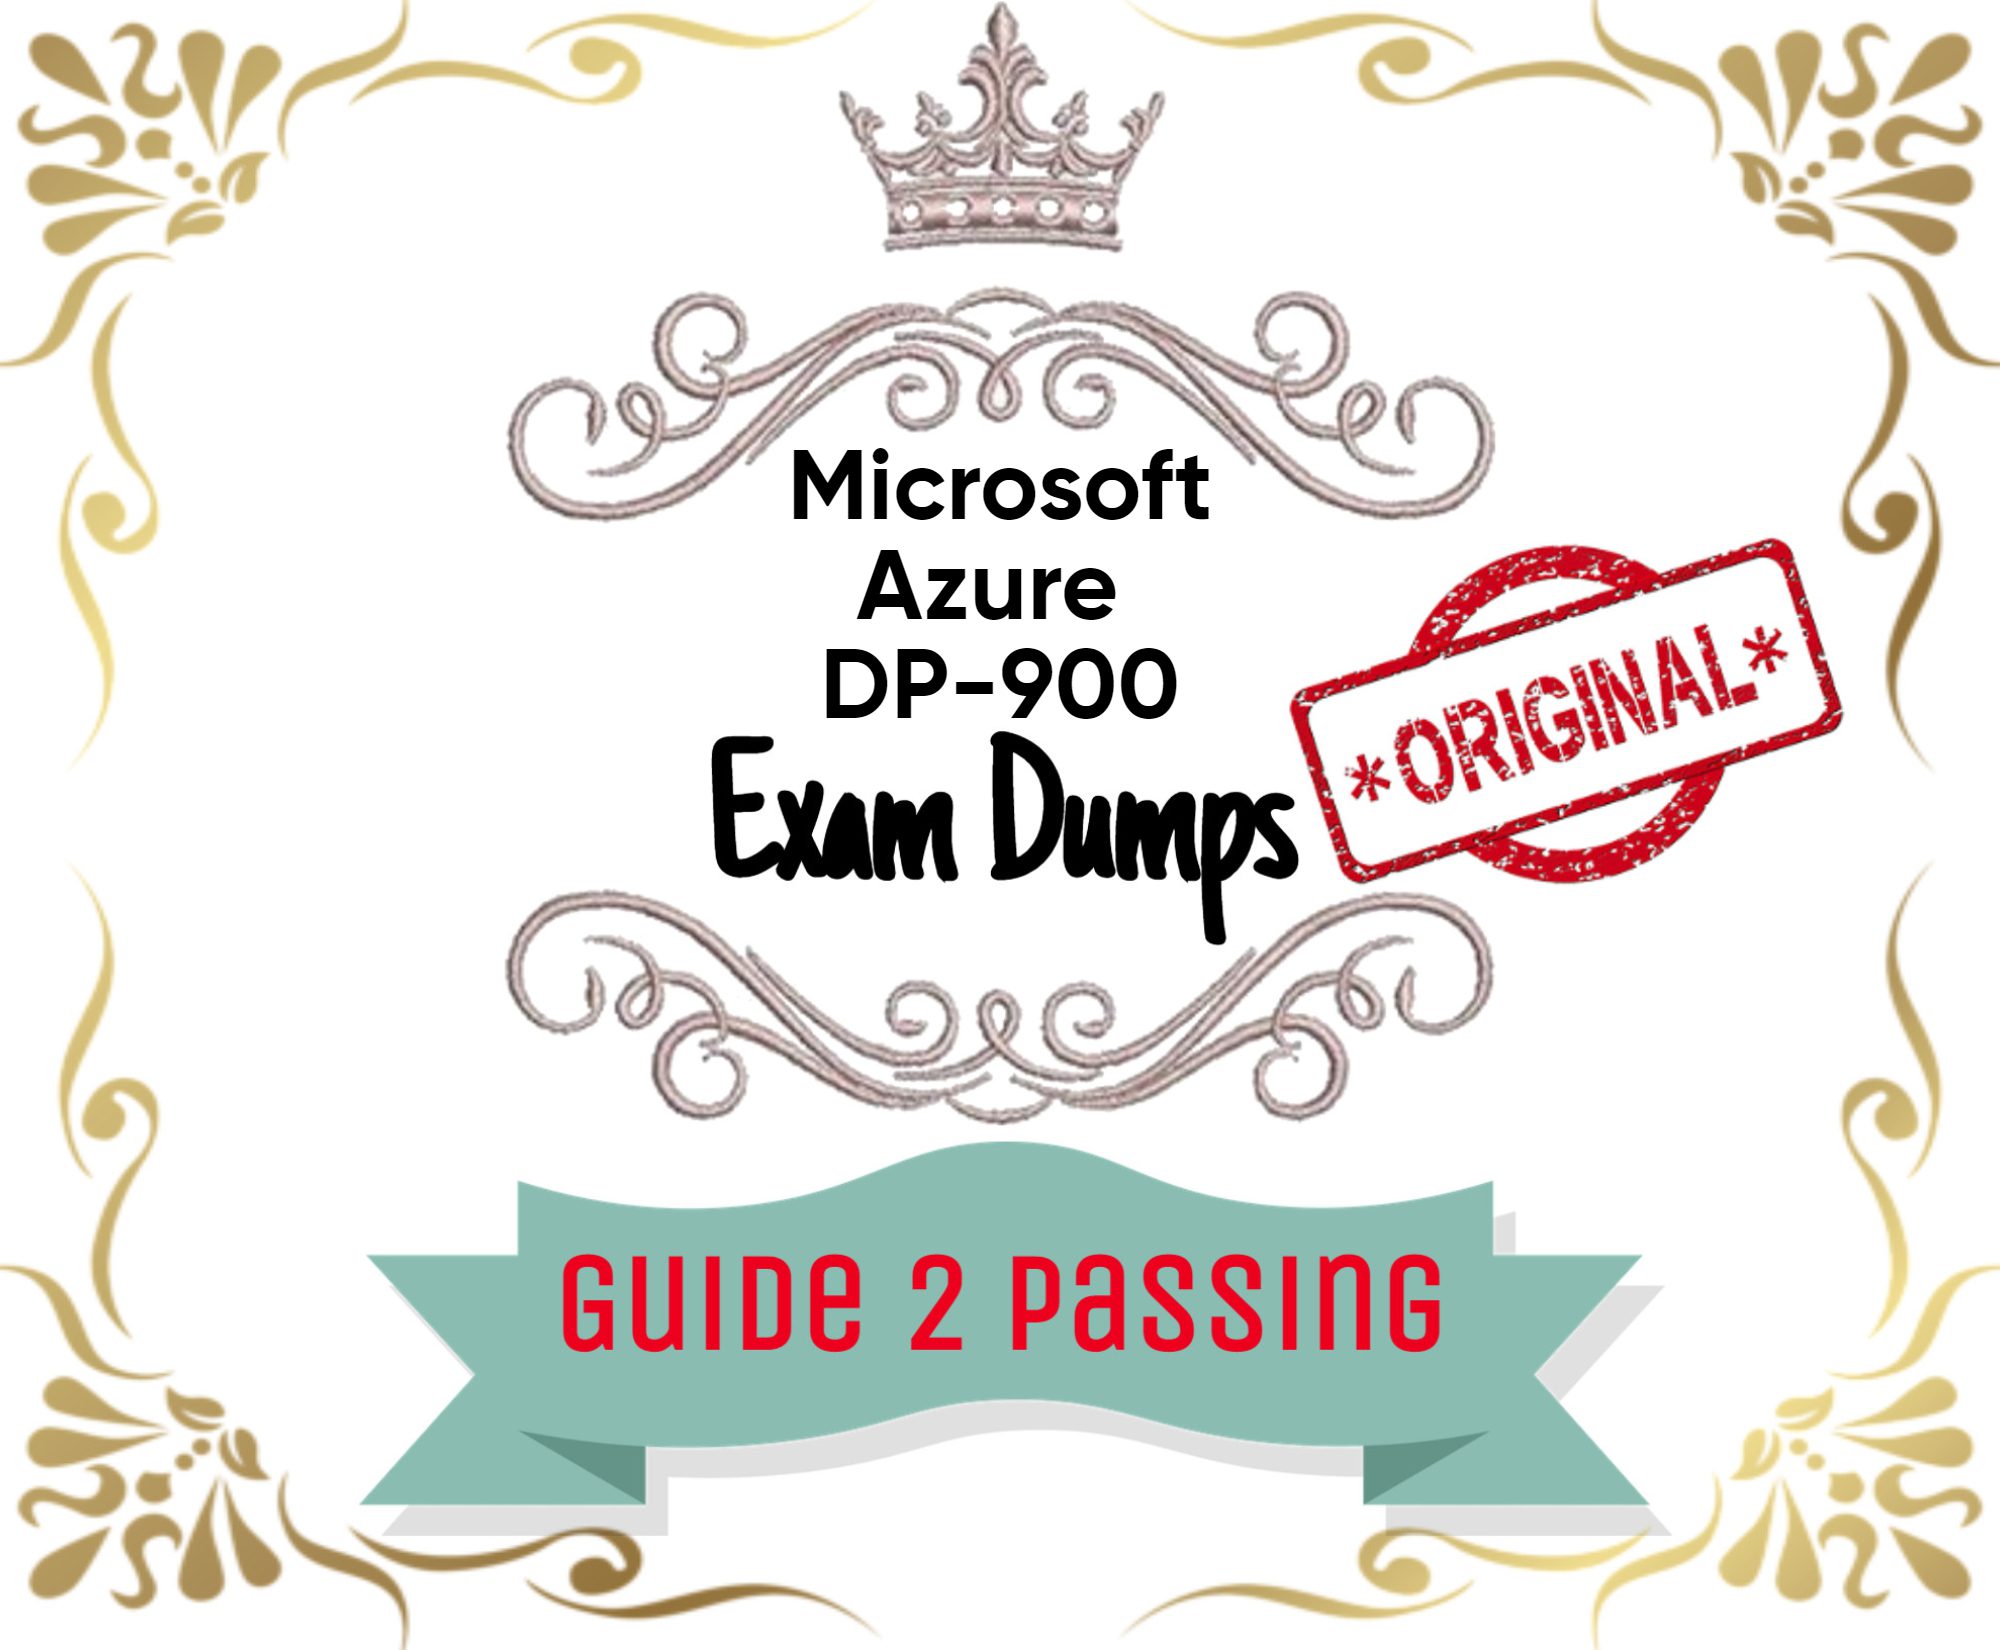 Pass Your Microsoft DP-900 Exam Dumps From Guide 2 Passing